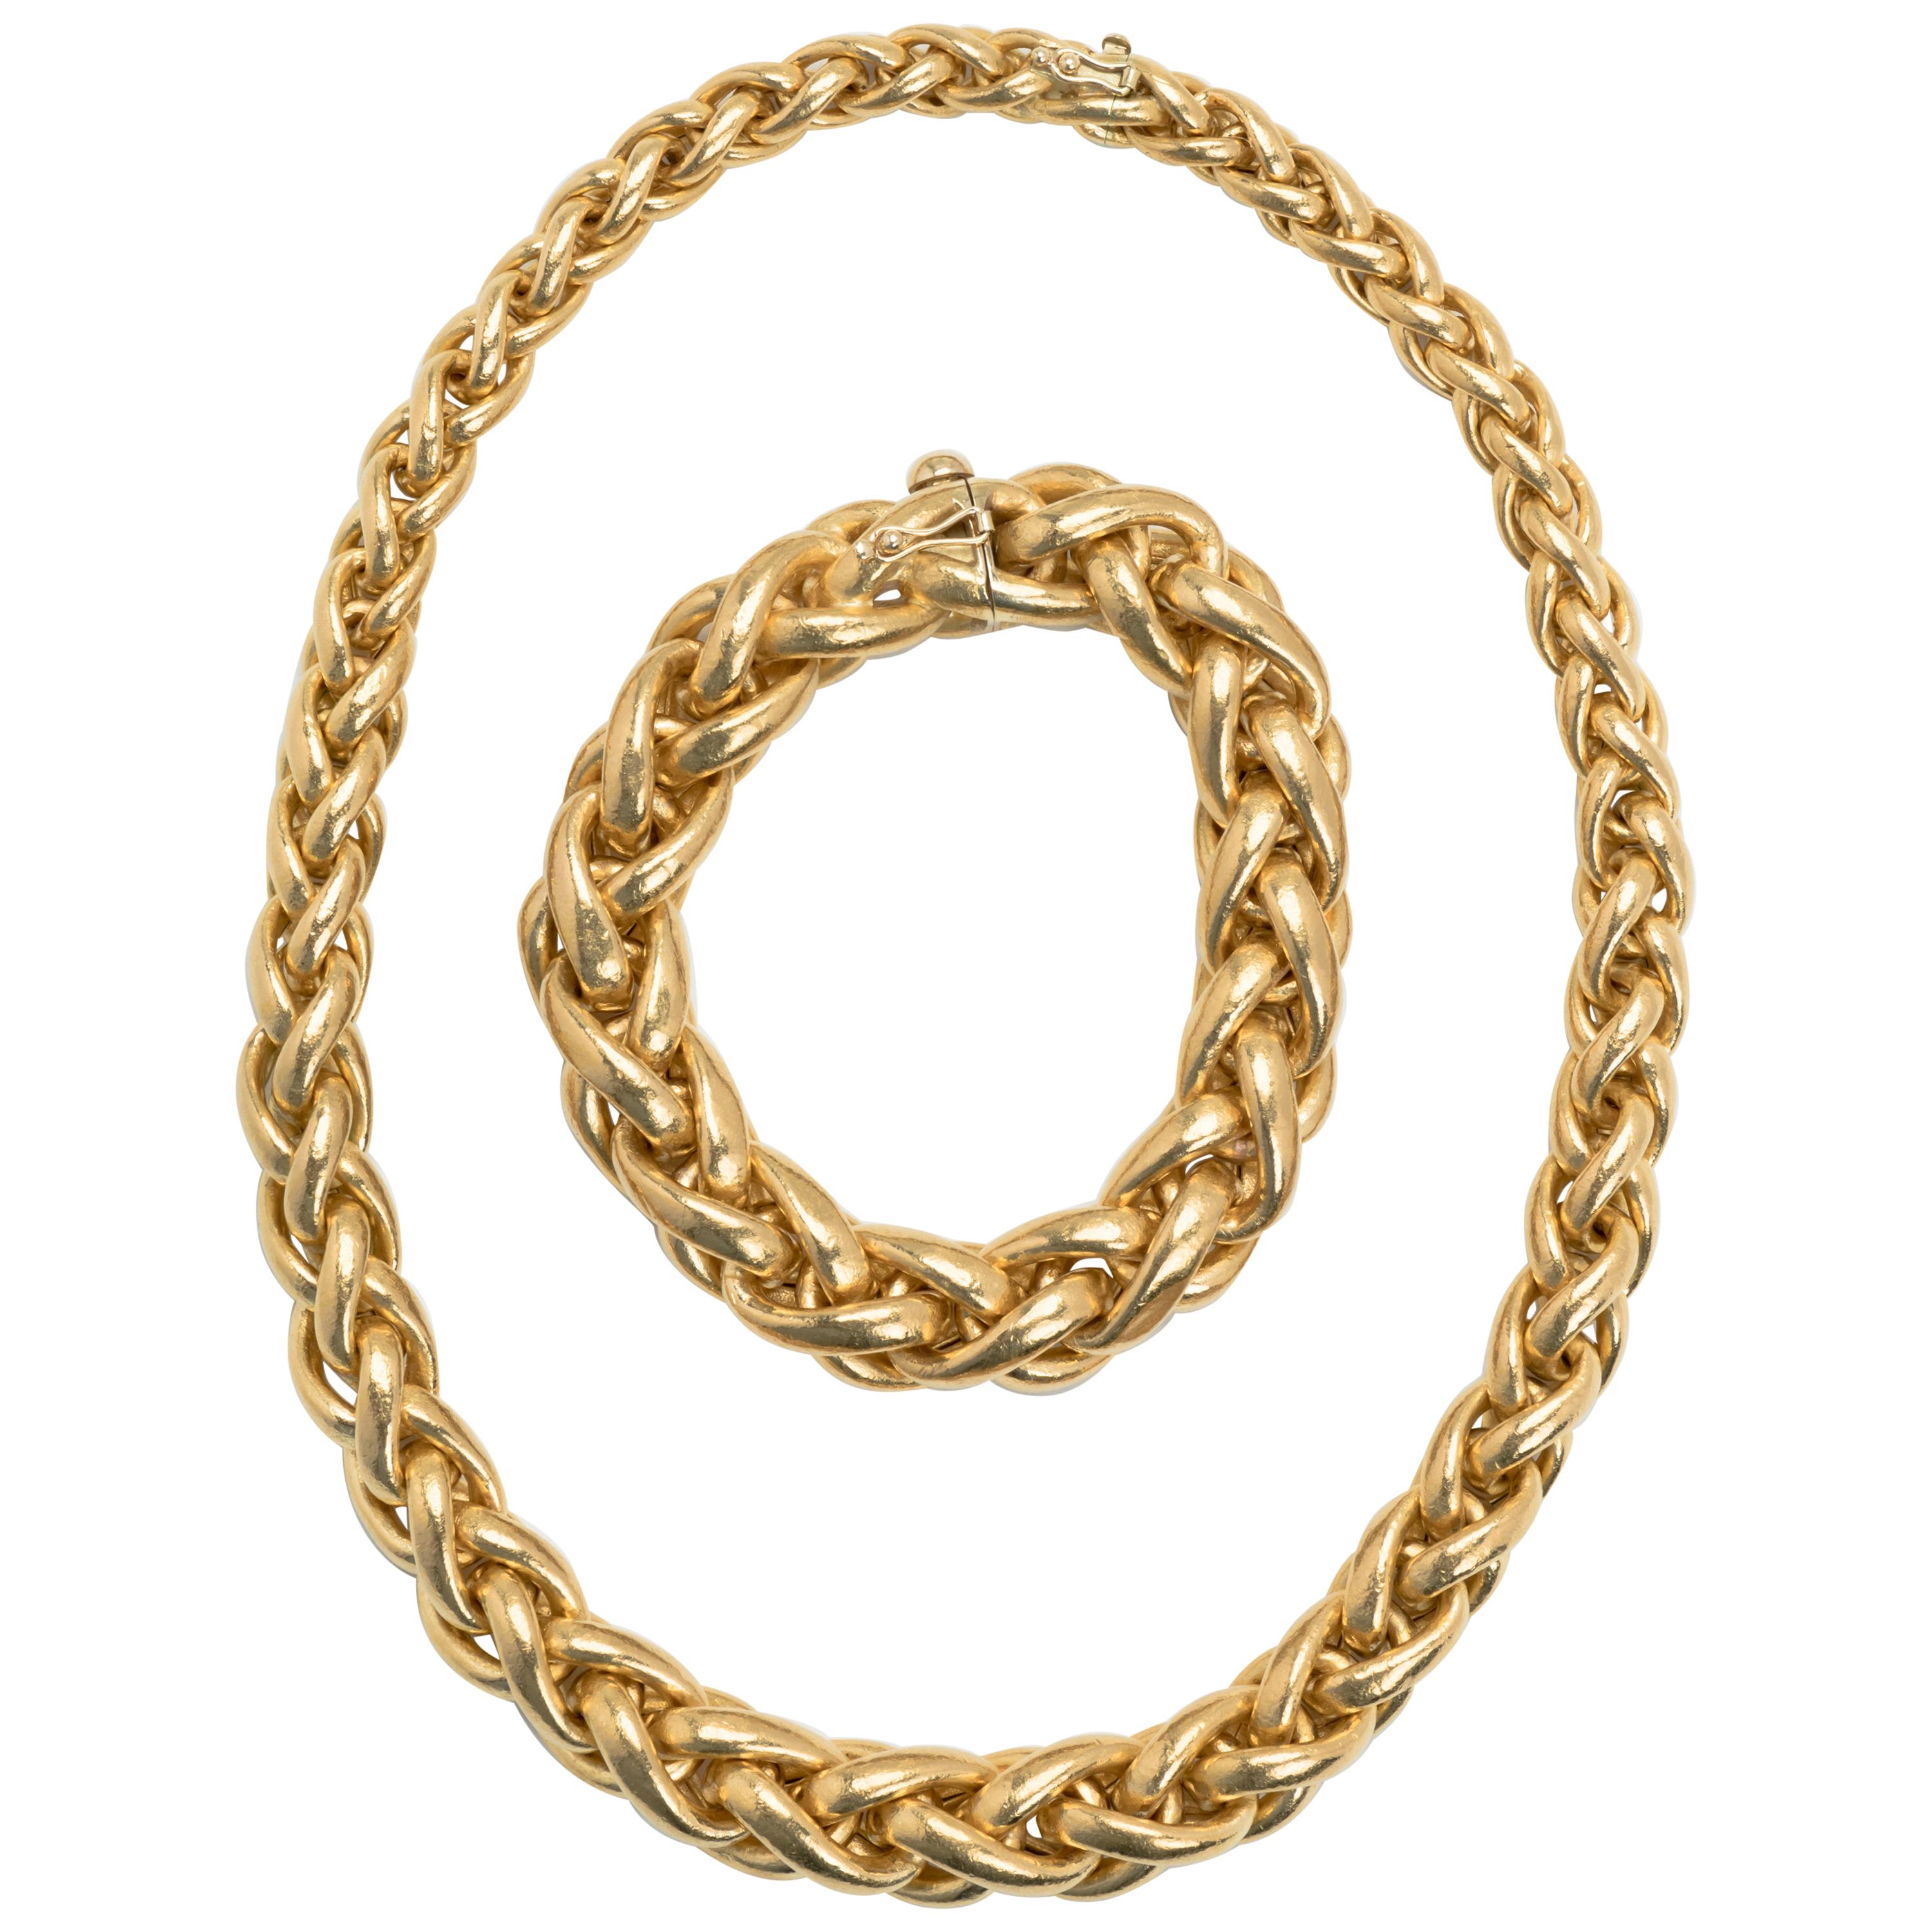 Swiss Made 24 Karat Gold Matching Necklace and Bracelet For Sale